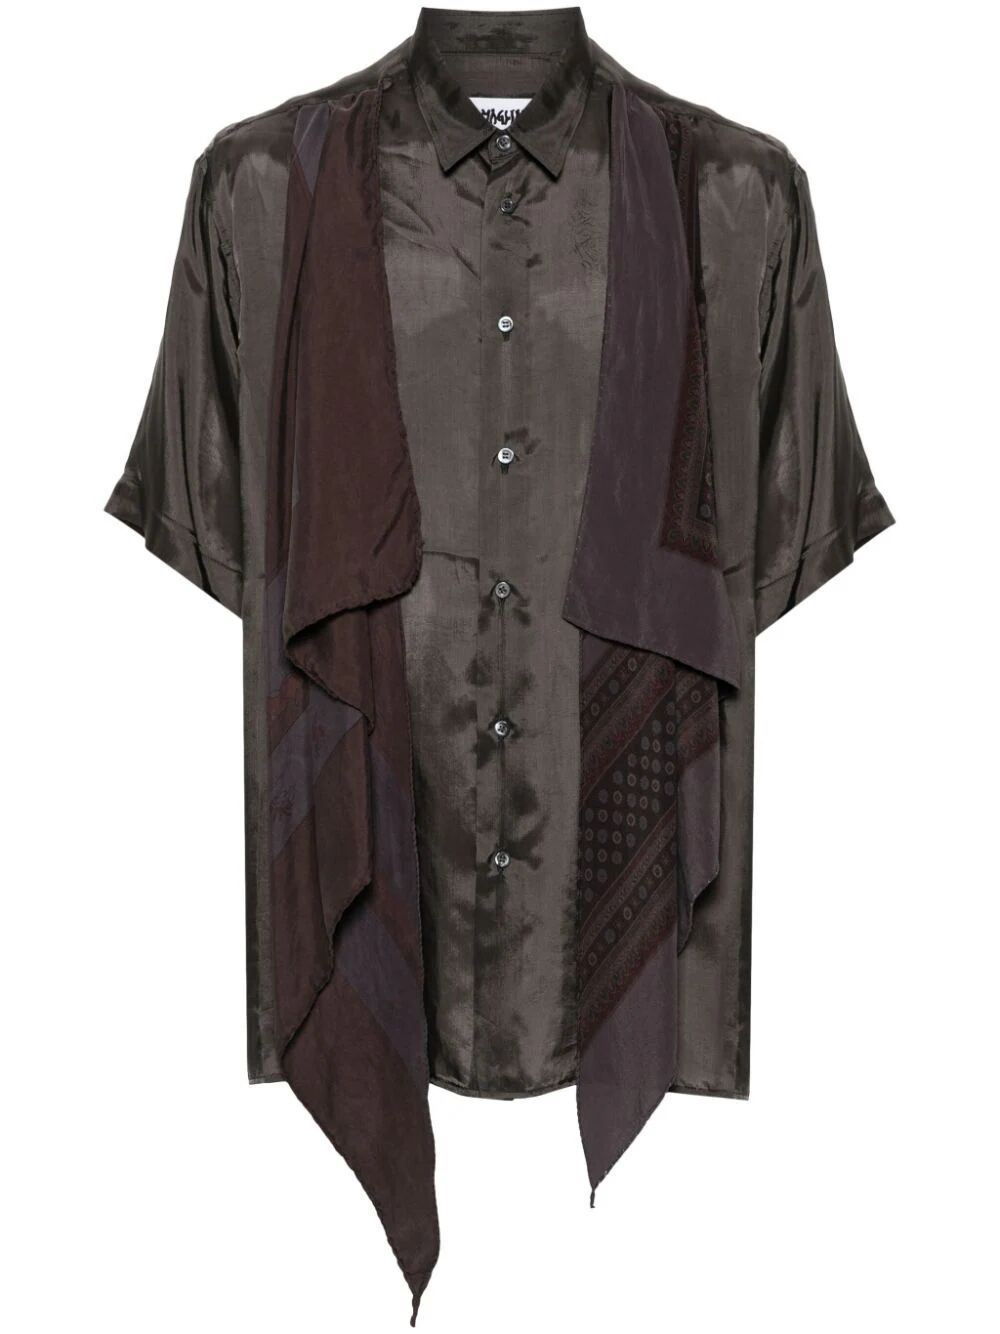 MAGLIANO PAREON SURPLUS SHIRT - PATTERN MAY CHANGE DPENDING ON THE SIZE,R28016315.LM15